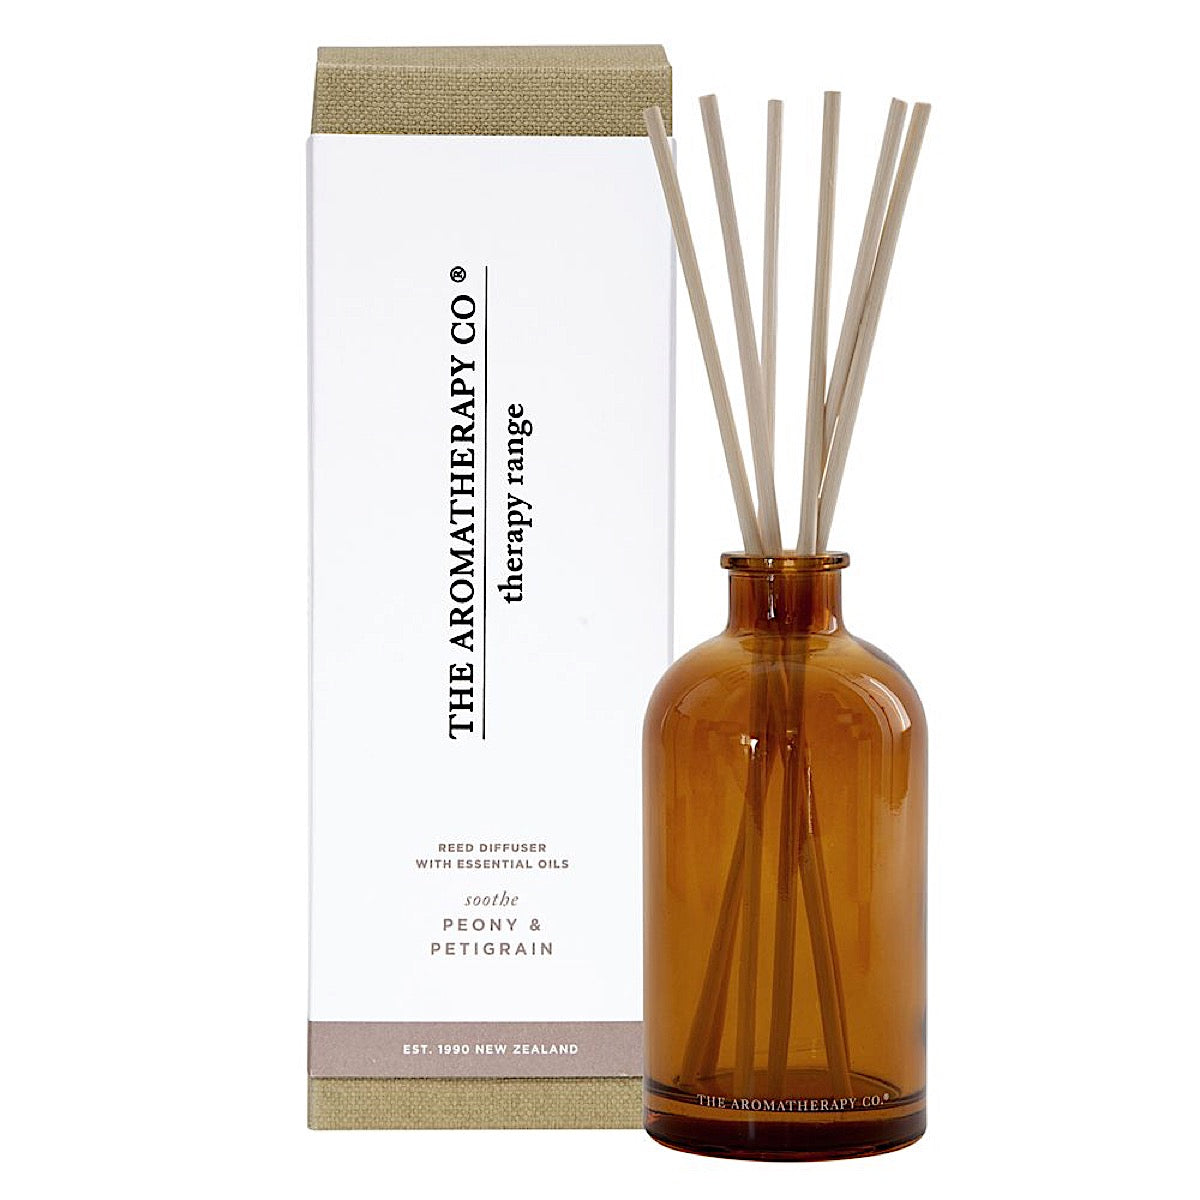 The Aromatherapy Co Therapy Range Soothe Petitgrain & Peony Reed Diffuser at More Than Just A Gift